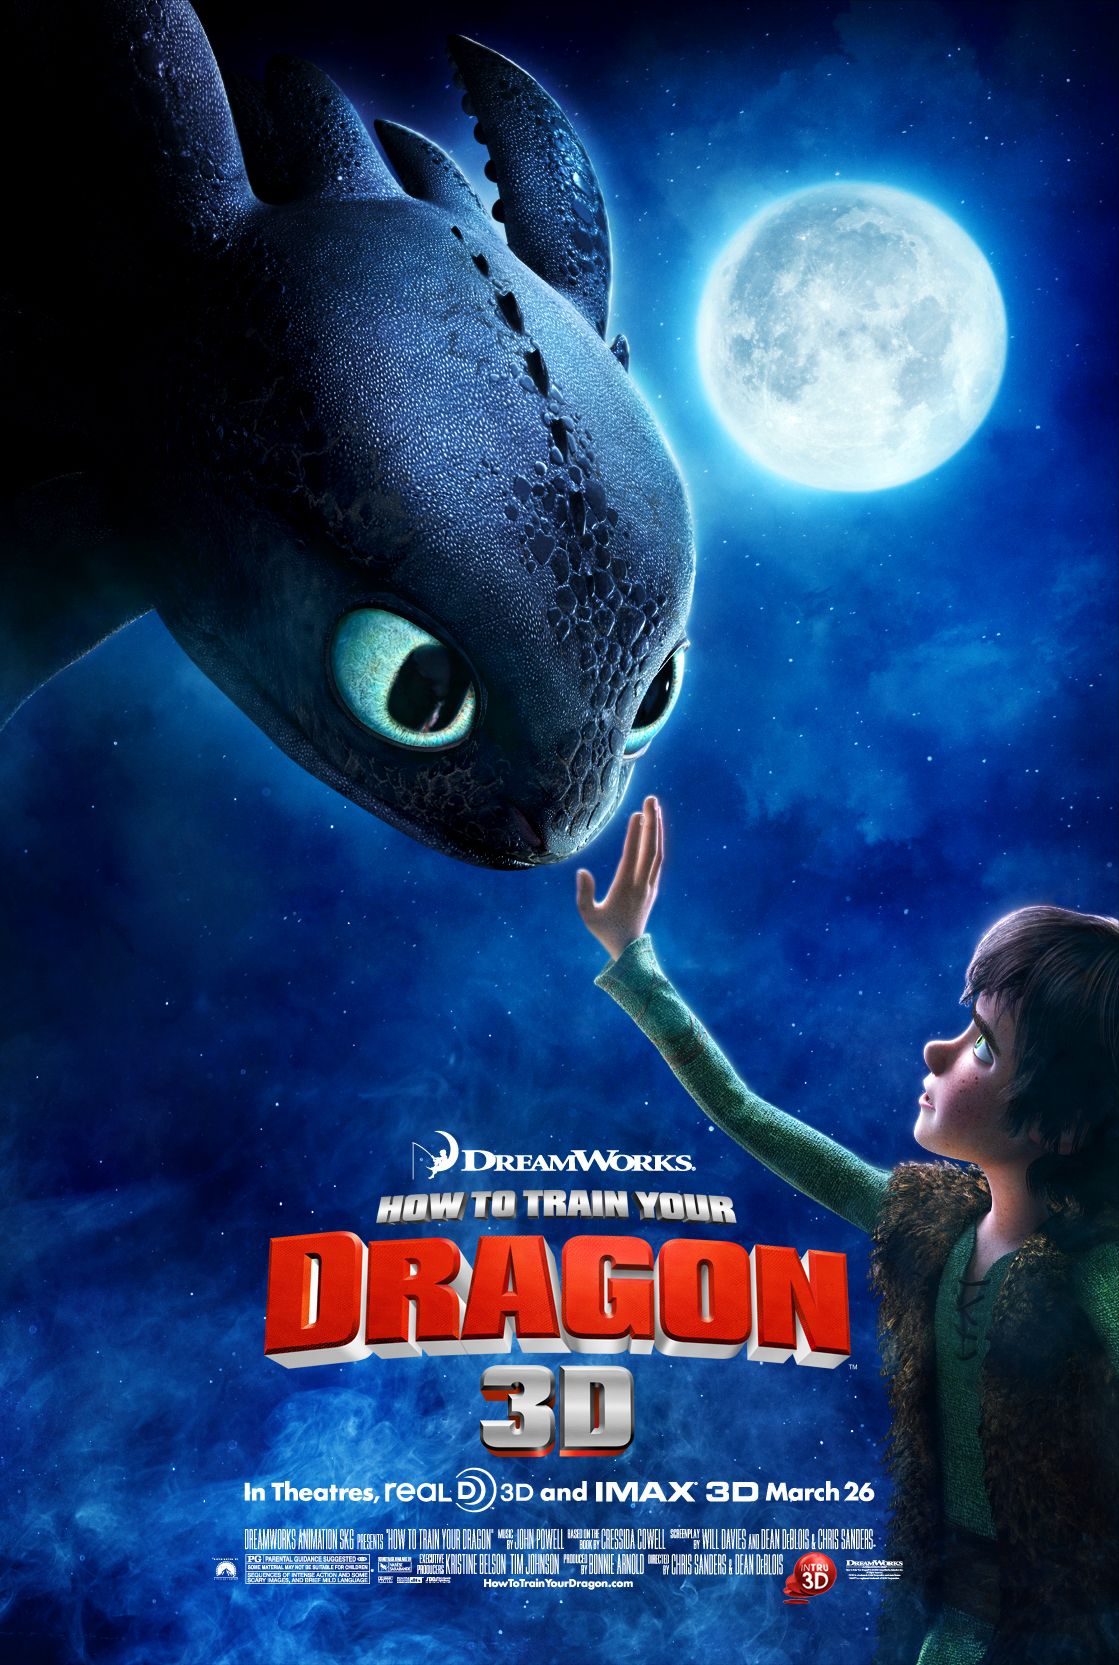 How to Train Your Dragon Exclusive Poster